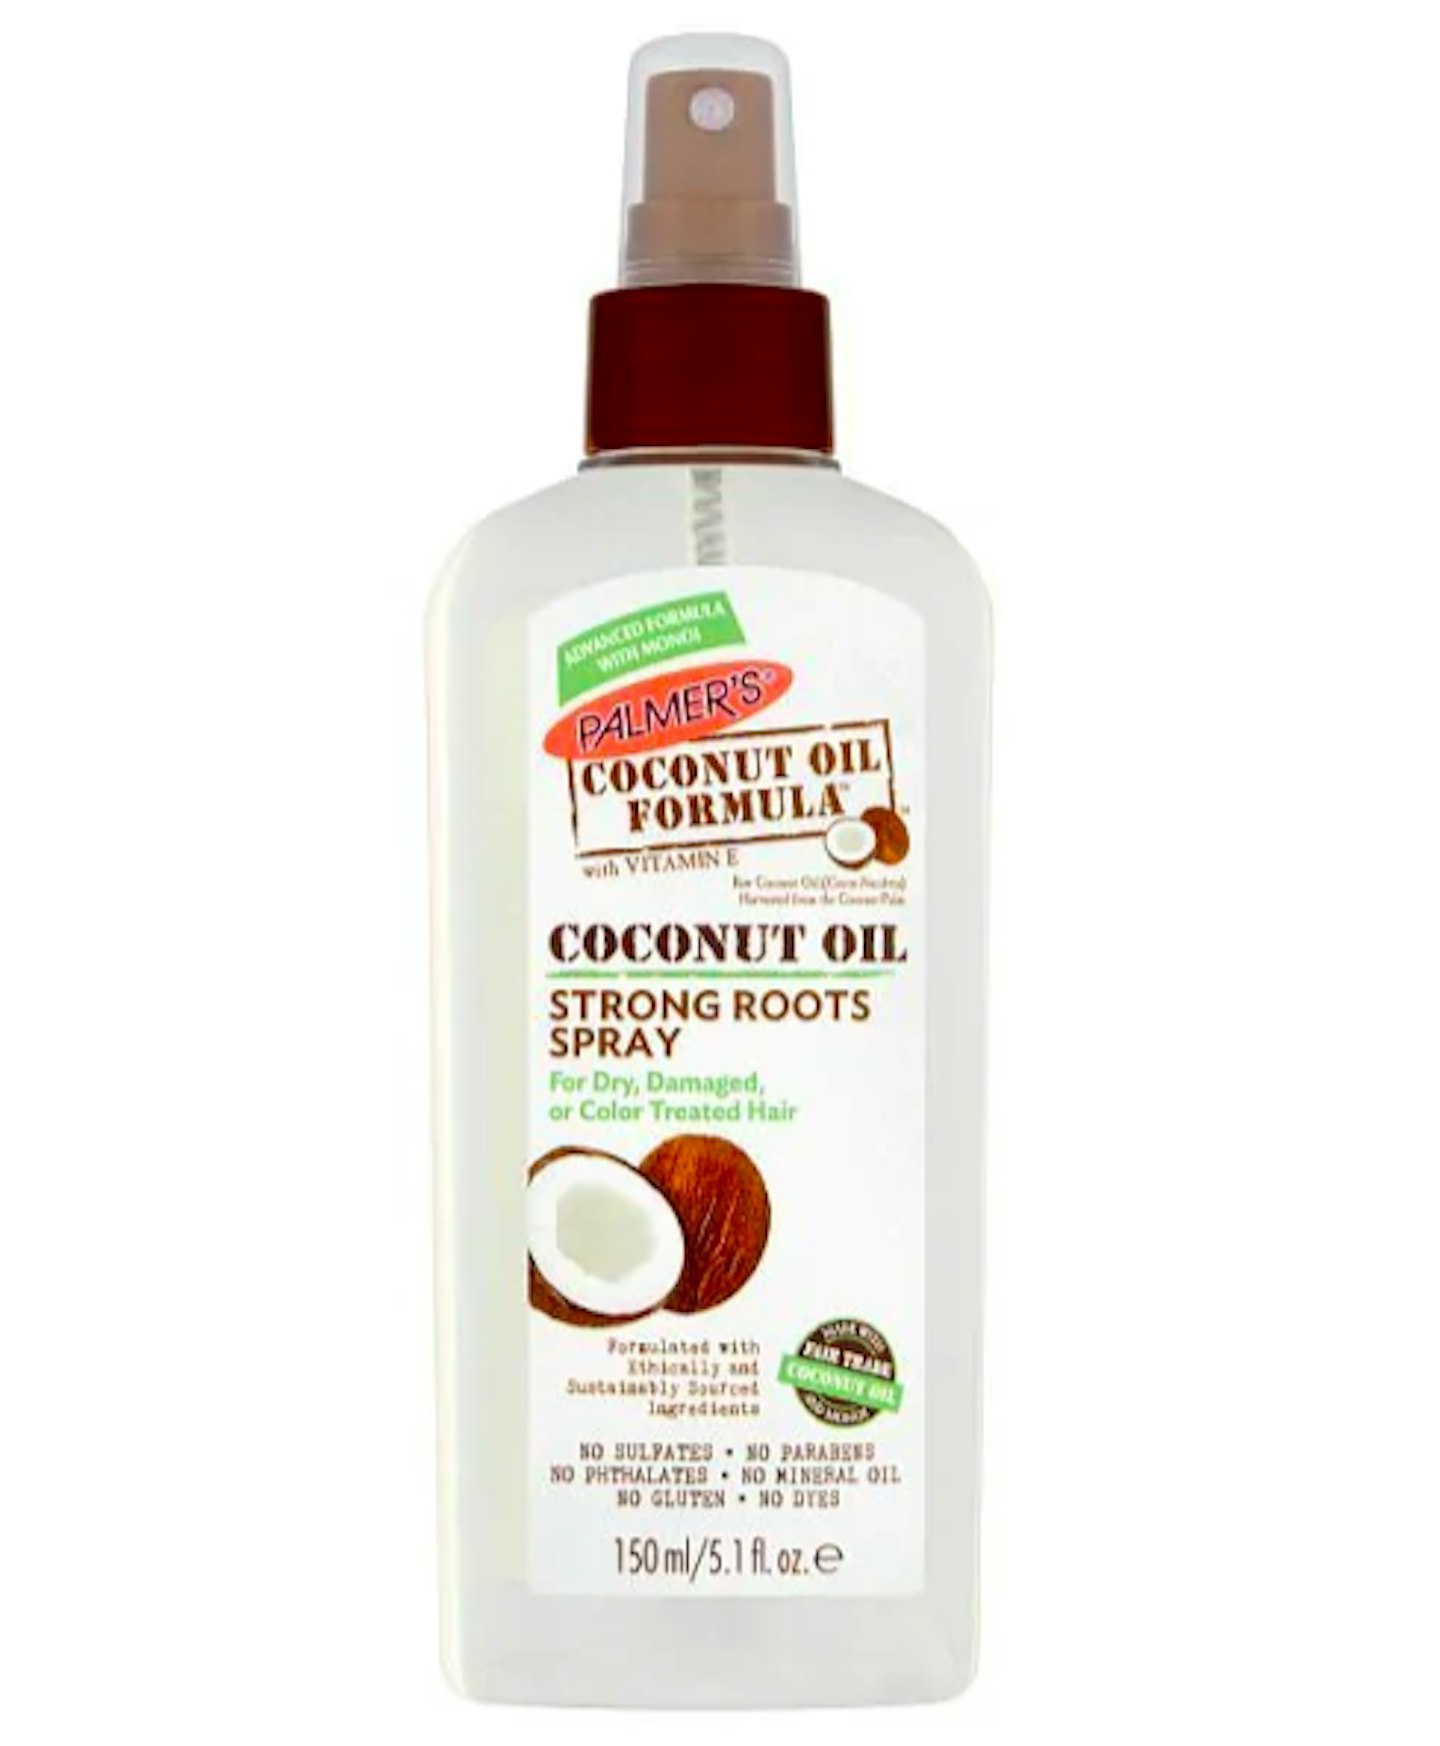 Palmer's Coconut Oil Formula Strong Roots Spray